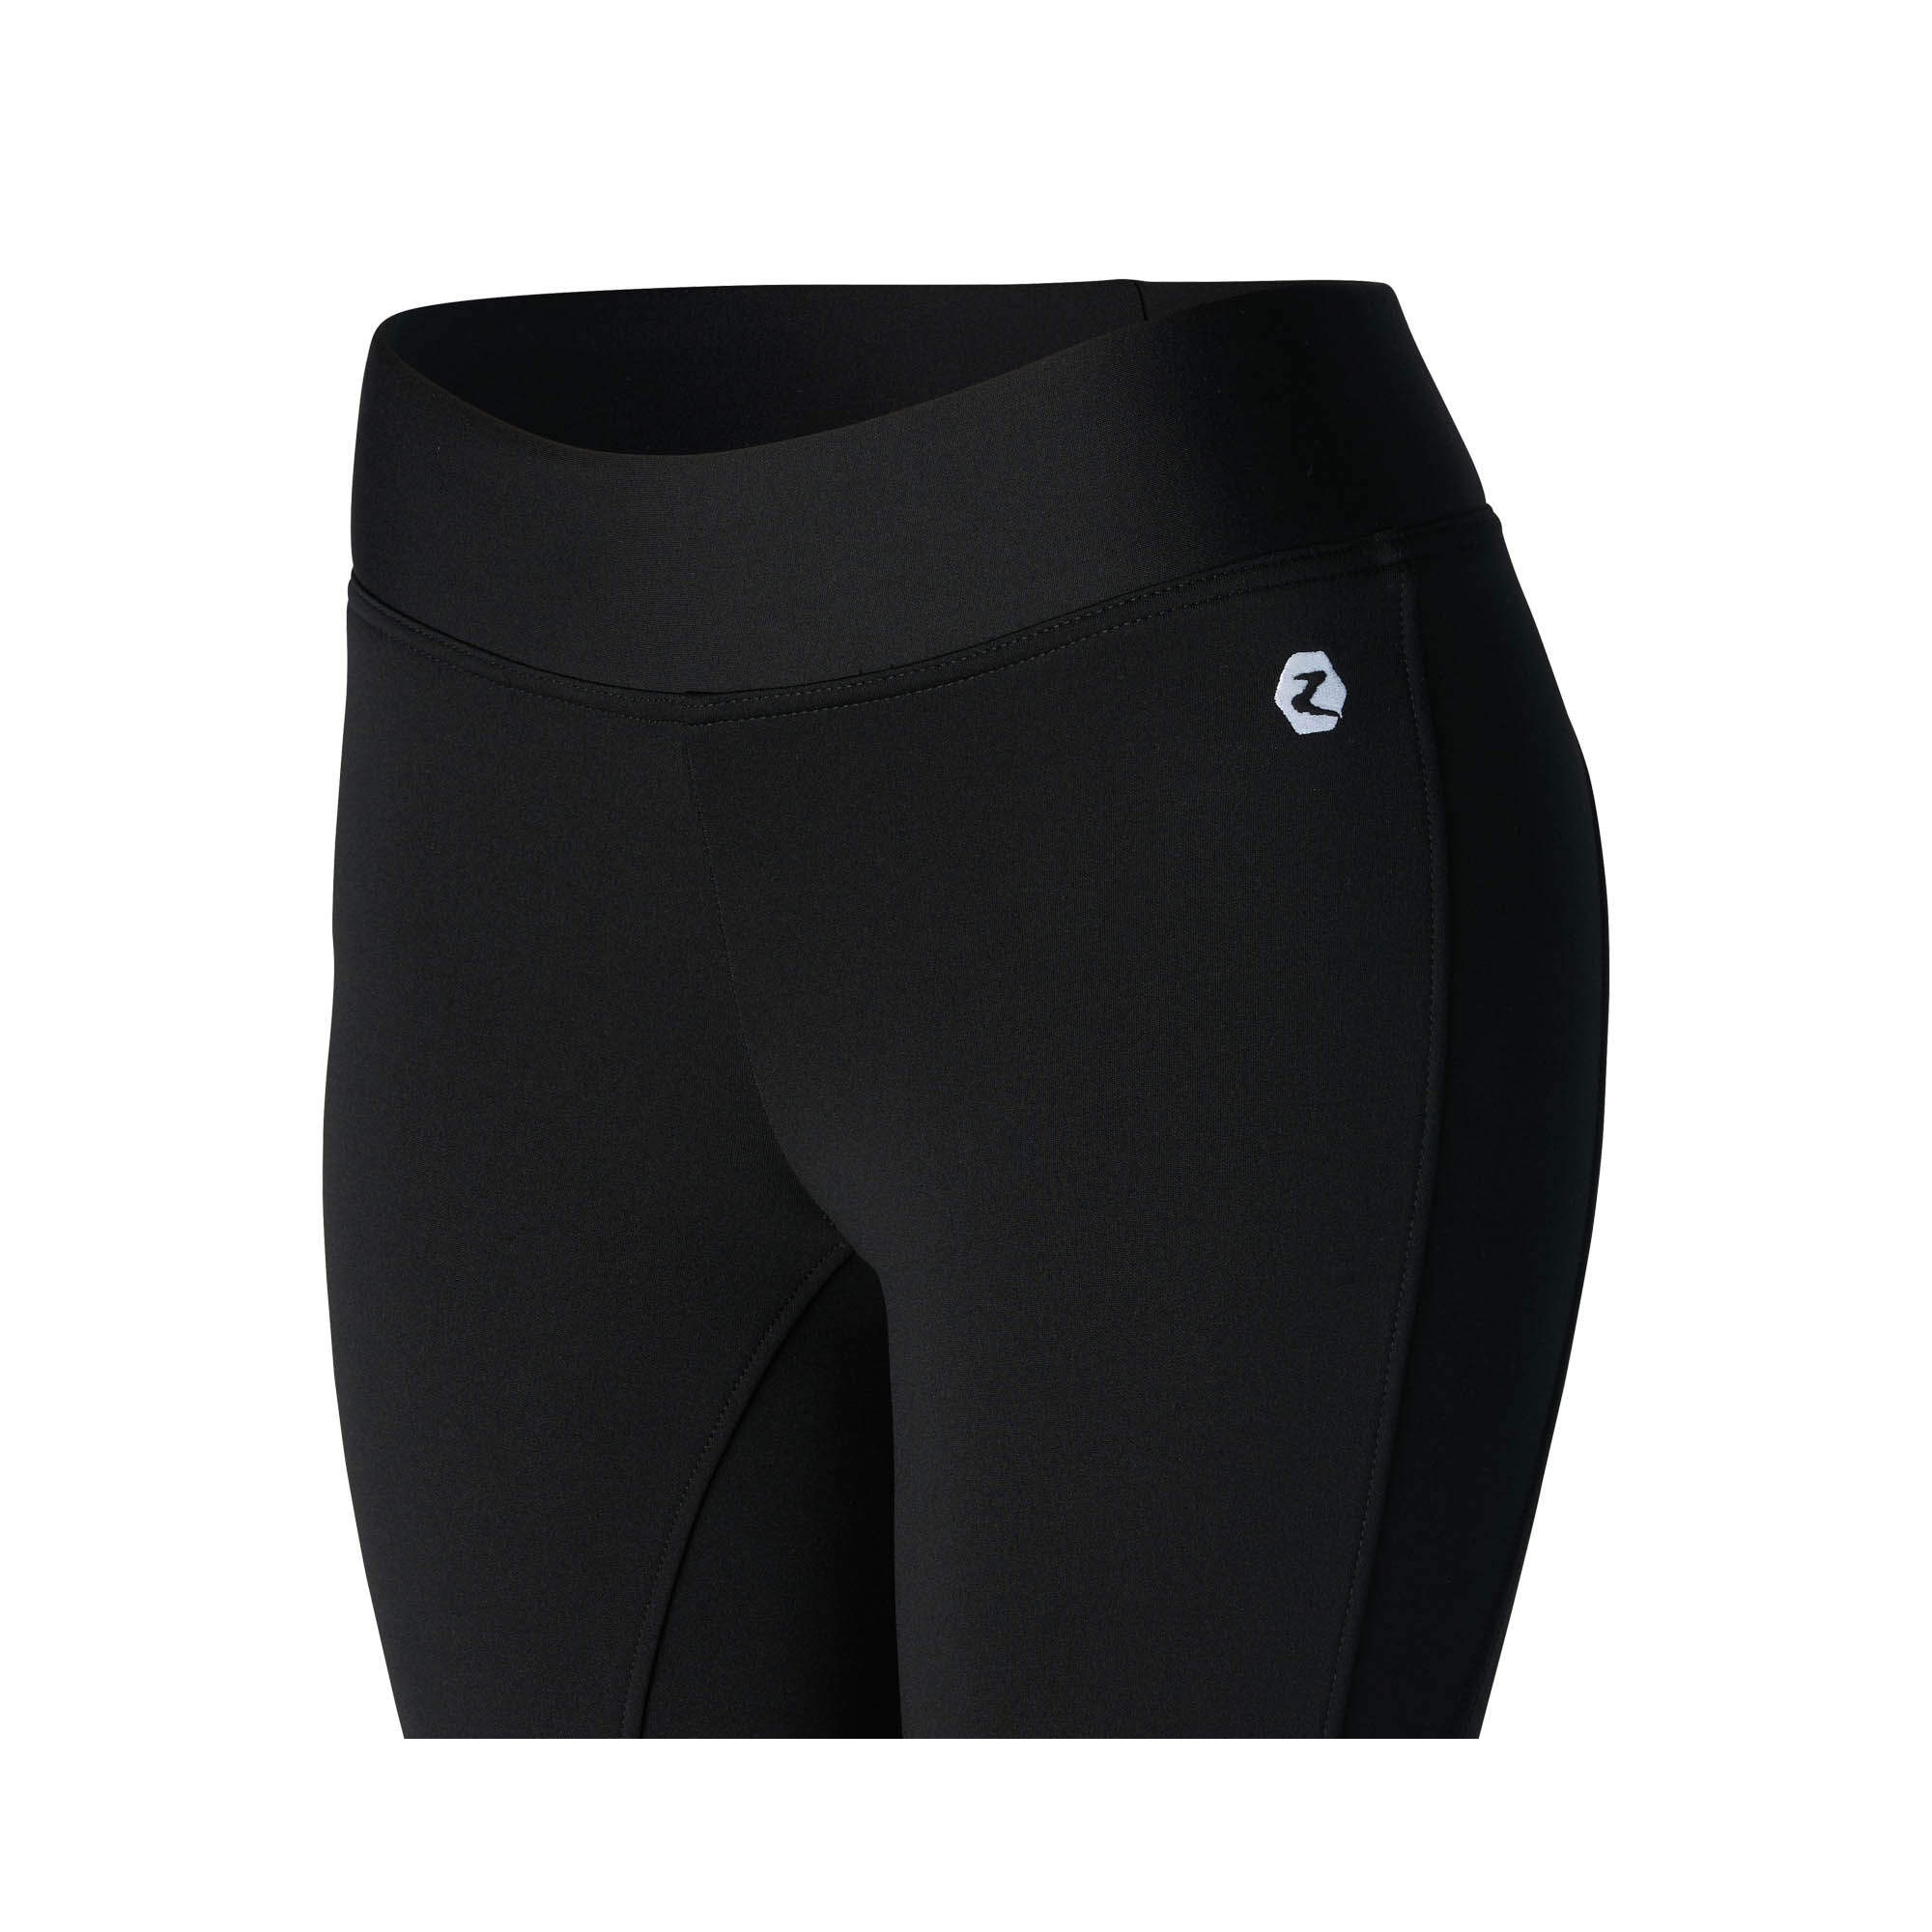 Horze Active Women's Knee Patch Riding Tights-Black 38 